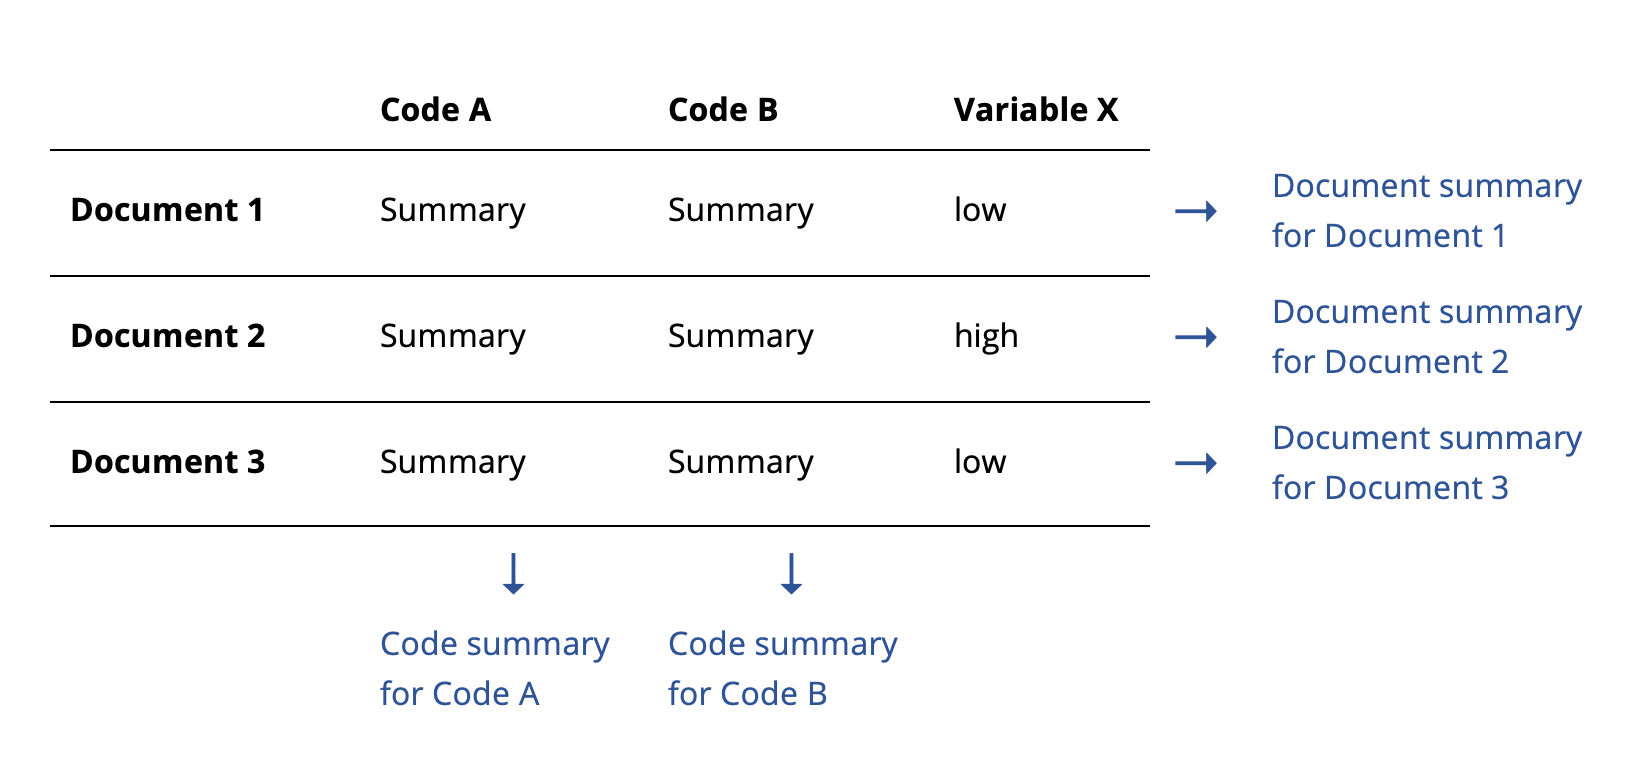 Schematic explanation of Code and Document summaries